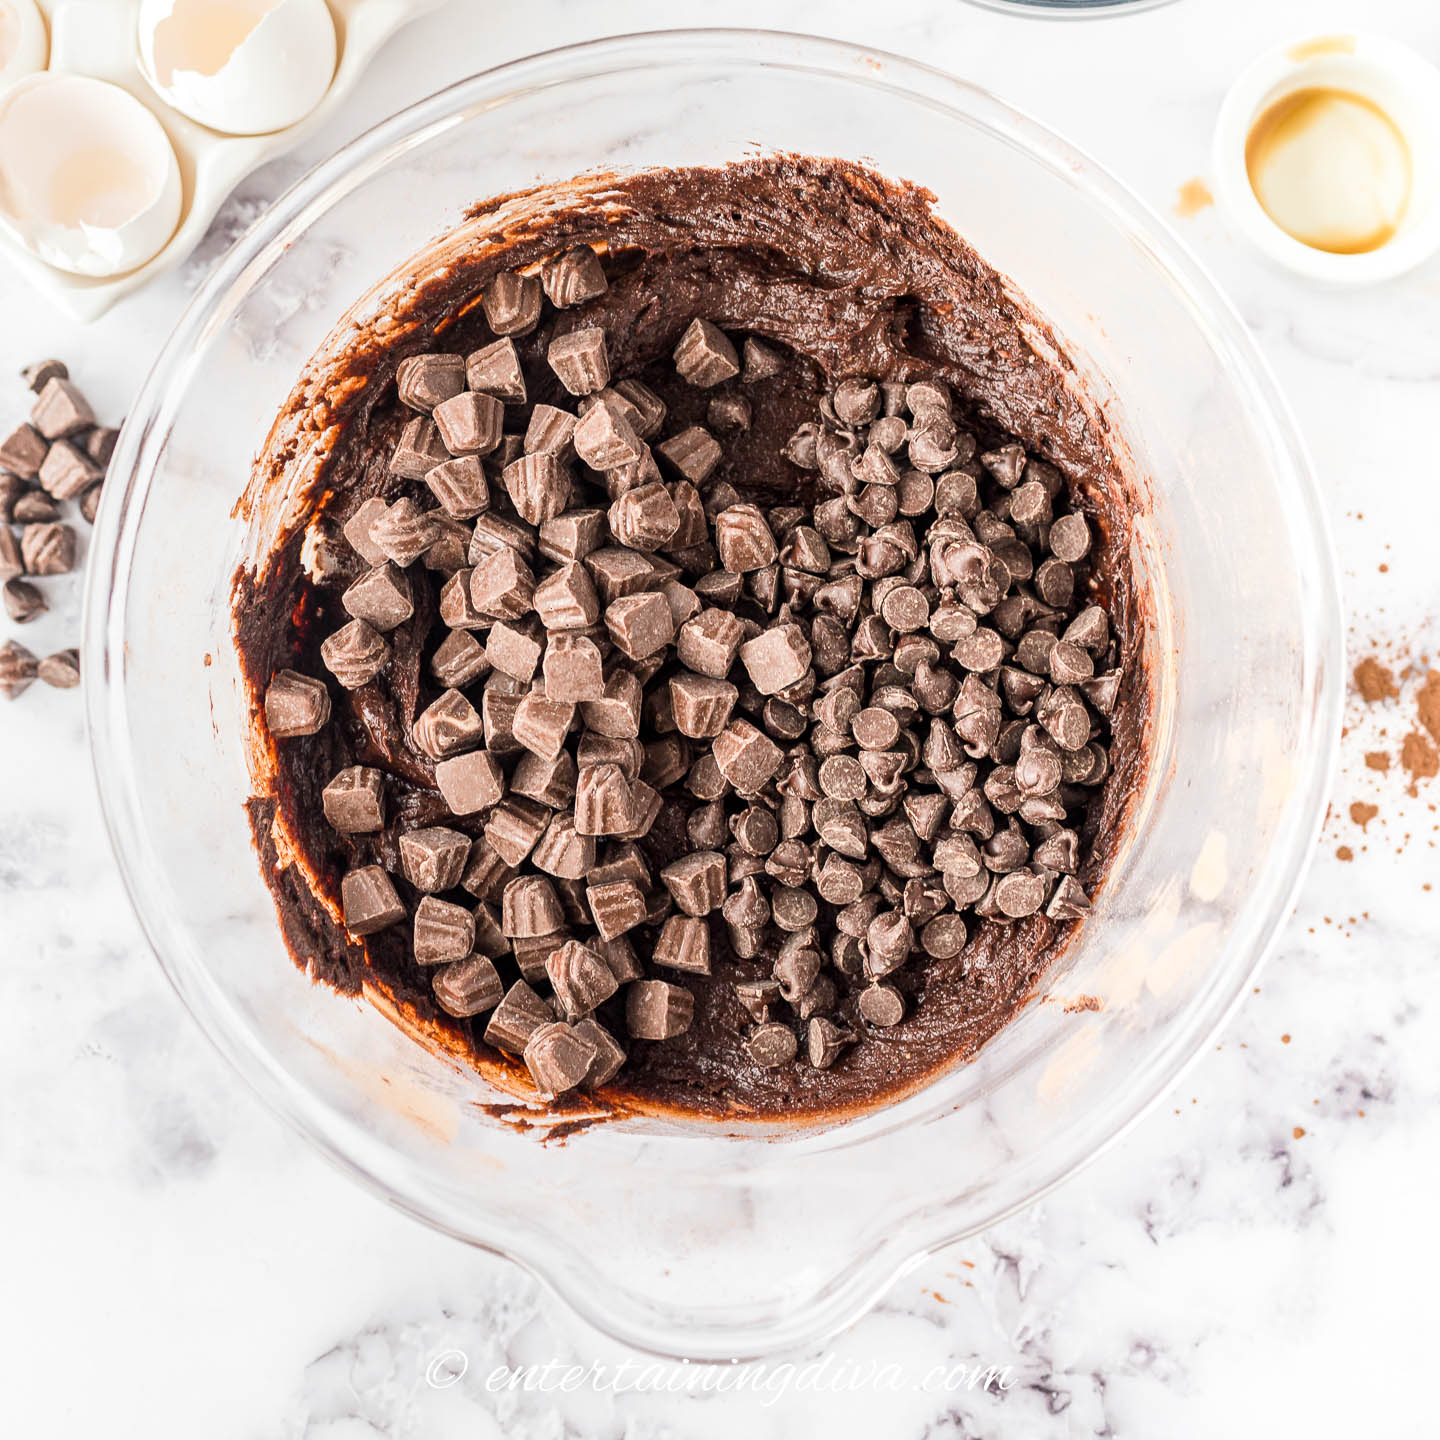 Chocolate chips and caramel dulce de leche truffles on top of the brownie batter in a bowl